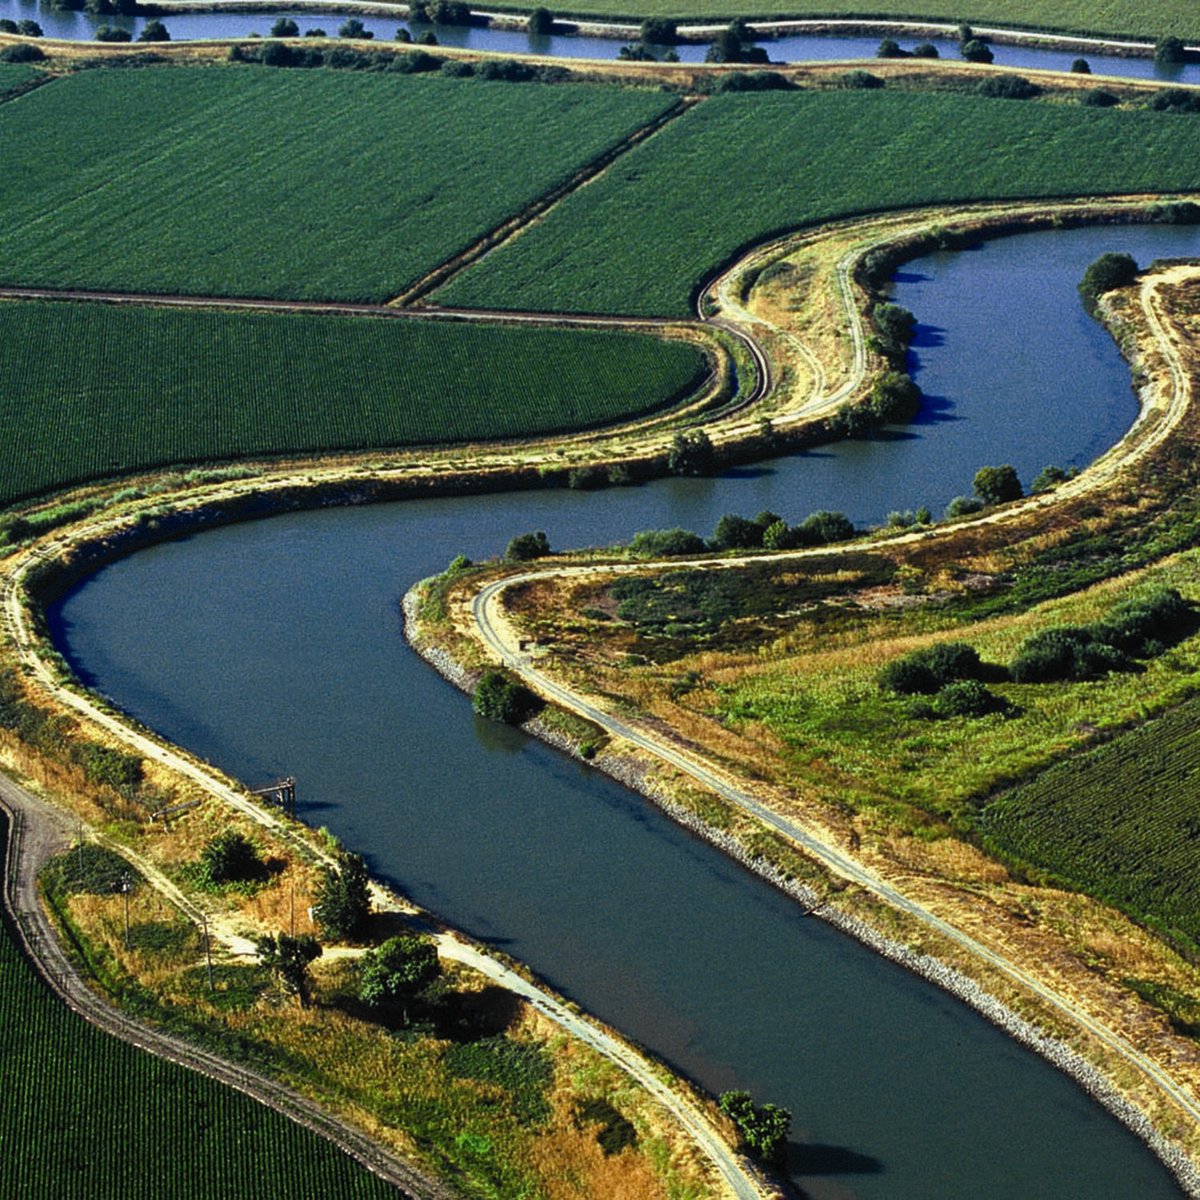 Gov. Newsom restarted planning for a #cawater diversion tunnel in the #sacdelta, so to provide some history we're making Sacramento-San Joaquin Delta Canal/Tunnel Proposals our Water Word of the Week from Aquapedia, our free online water encyclopedia. watereducation.org/aquapedia/sacr…